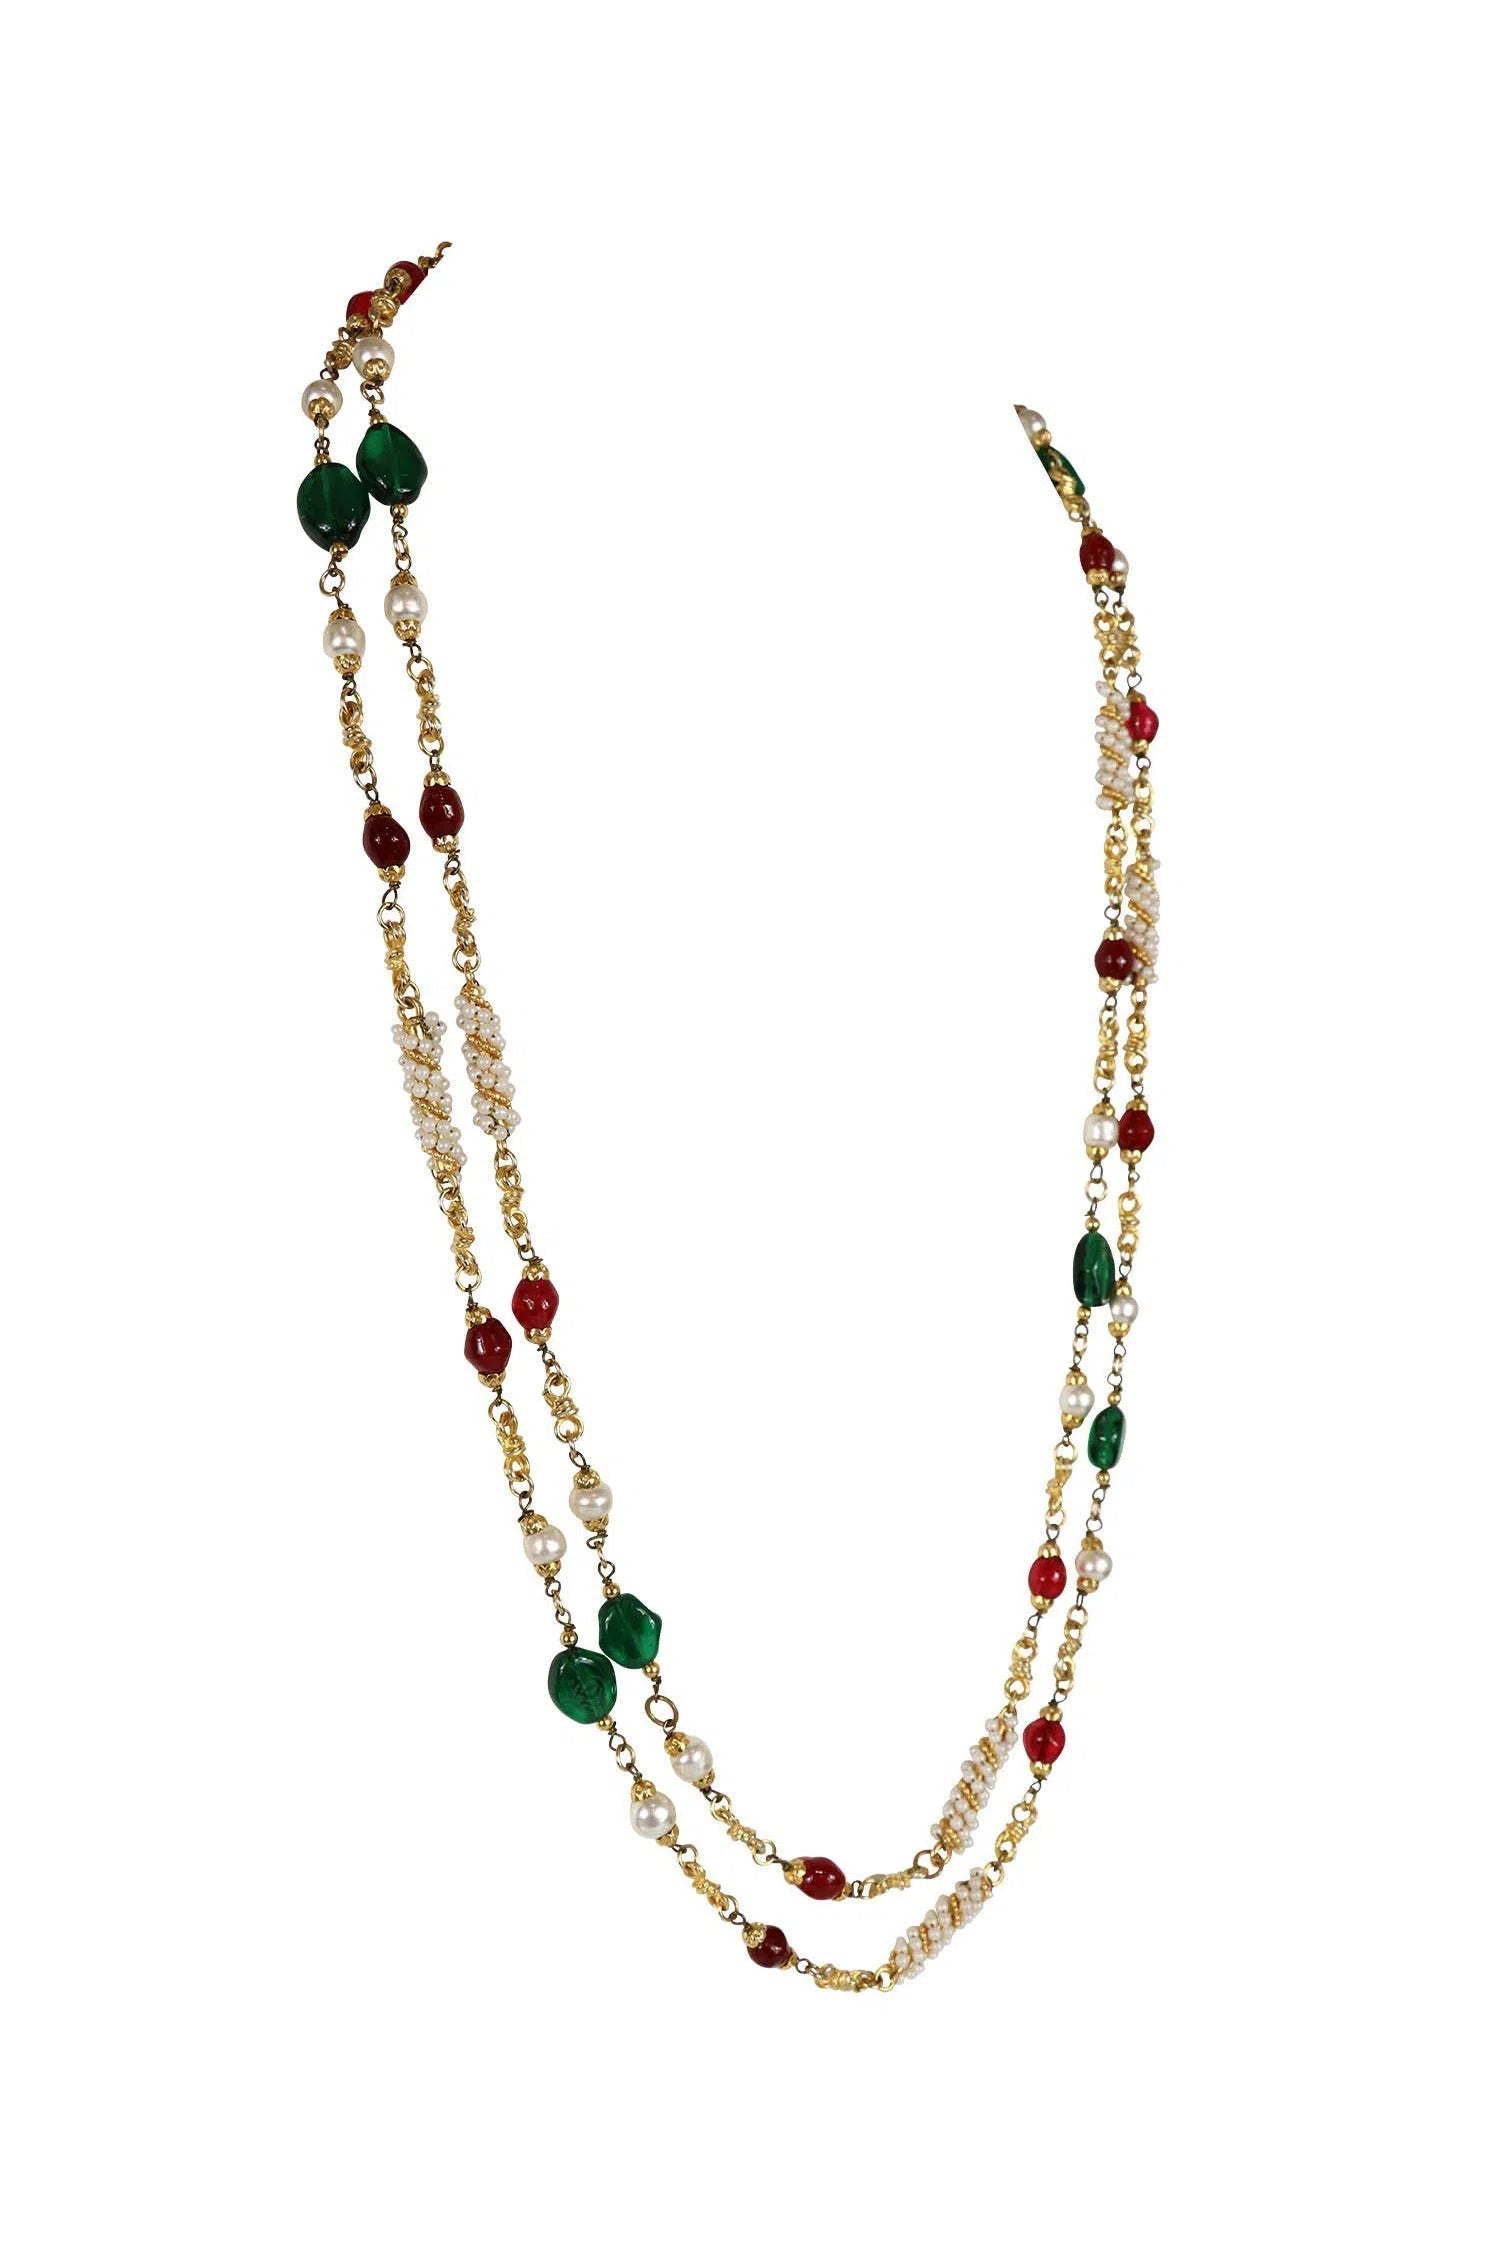 Chanel 1984 Long Red Green Gripoix Pearl Sautoir Necklace - Foxy Couture Carmel